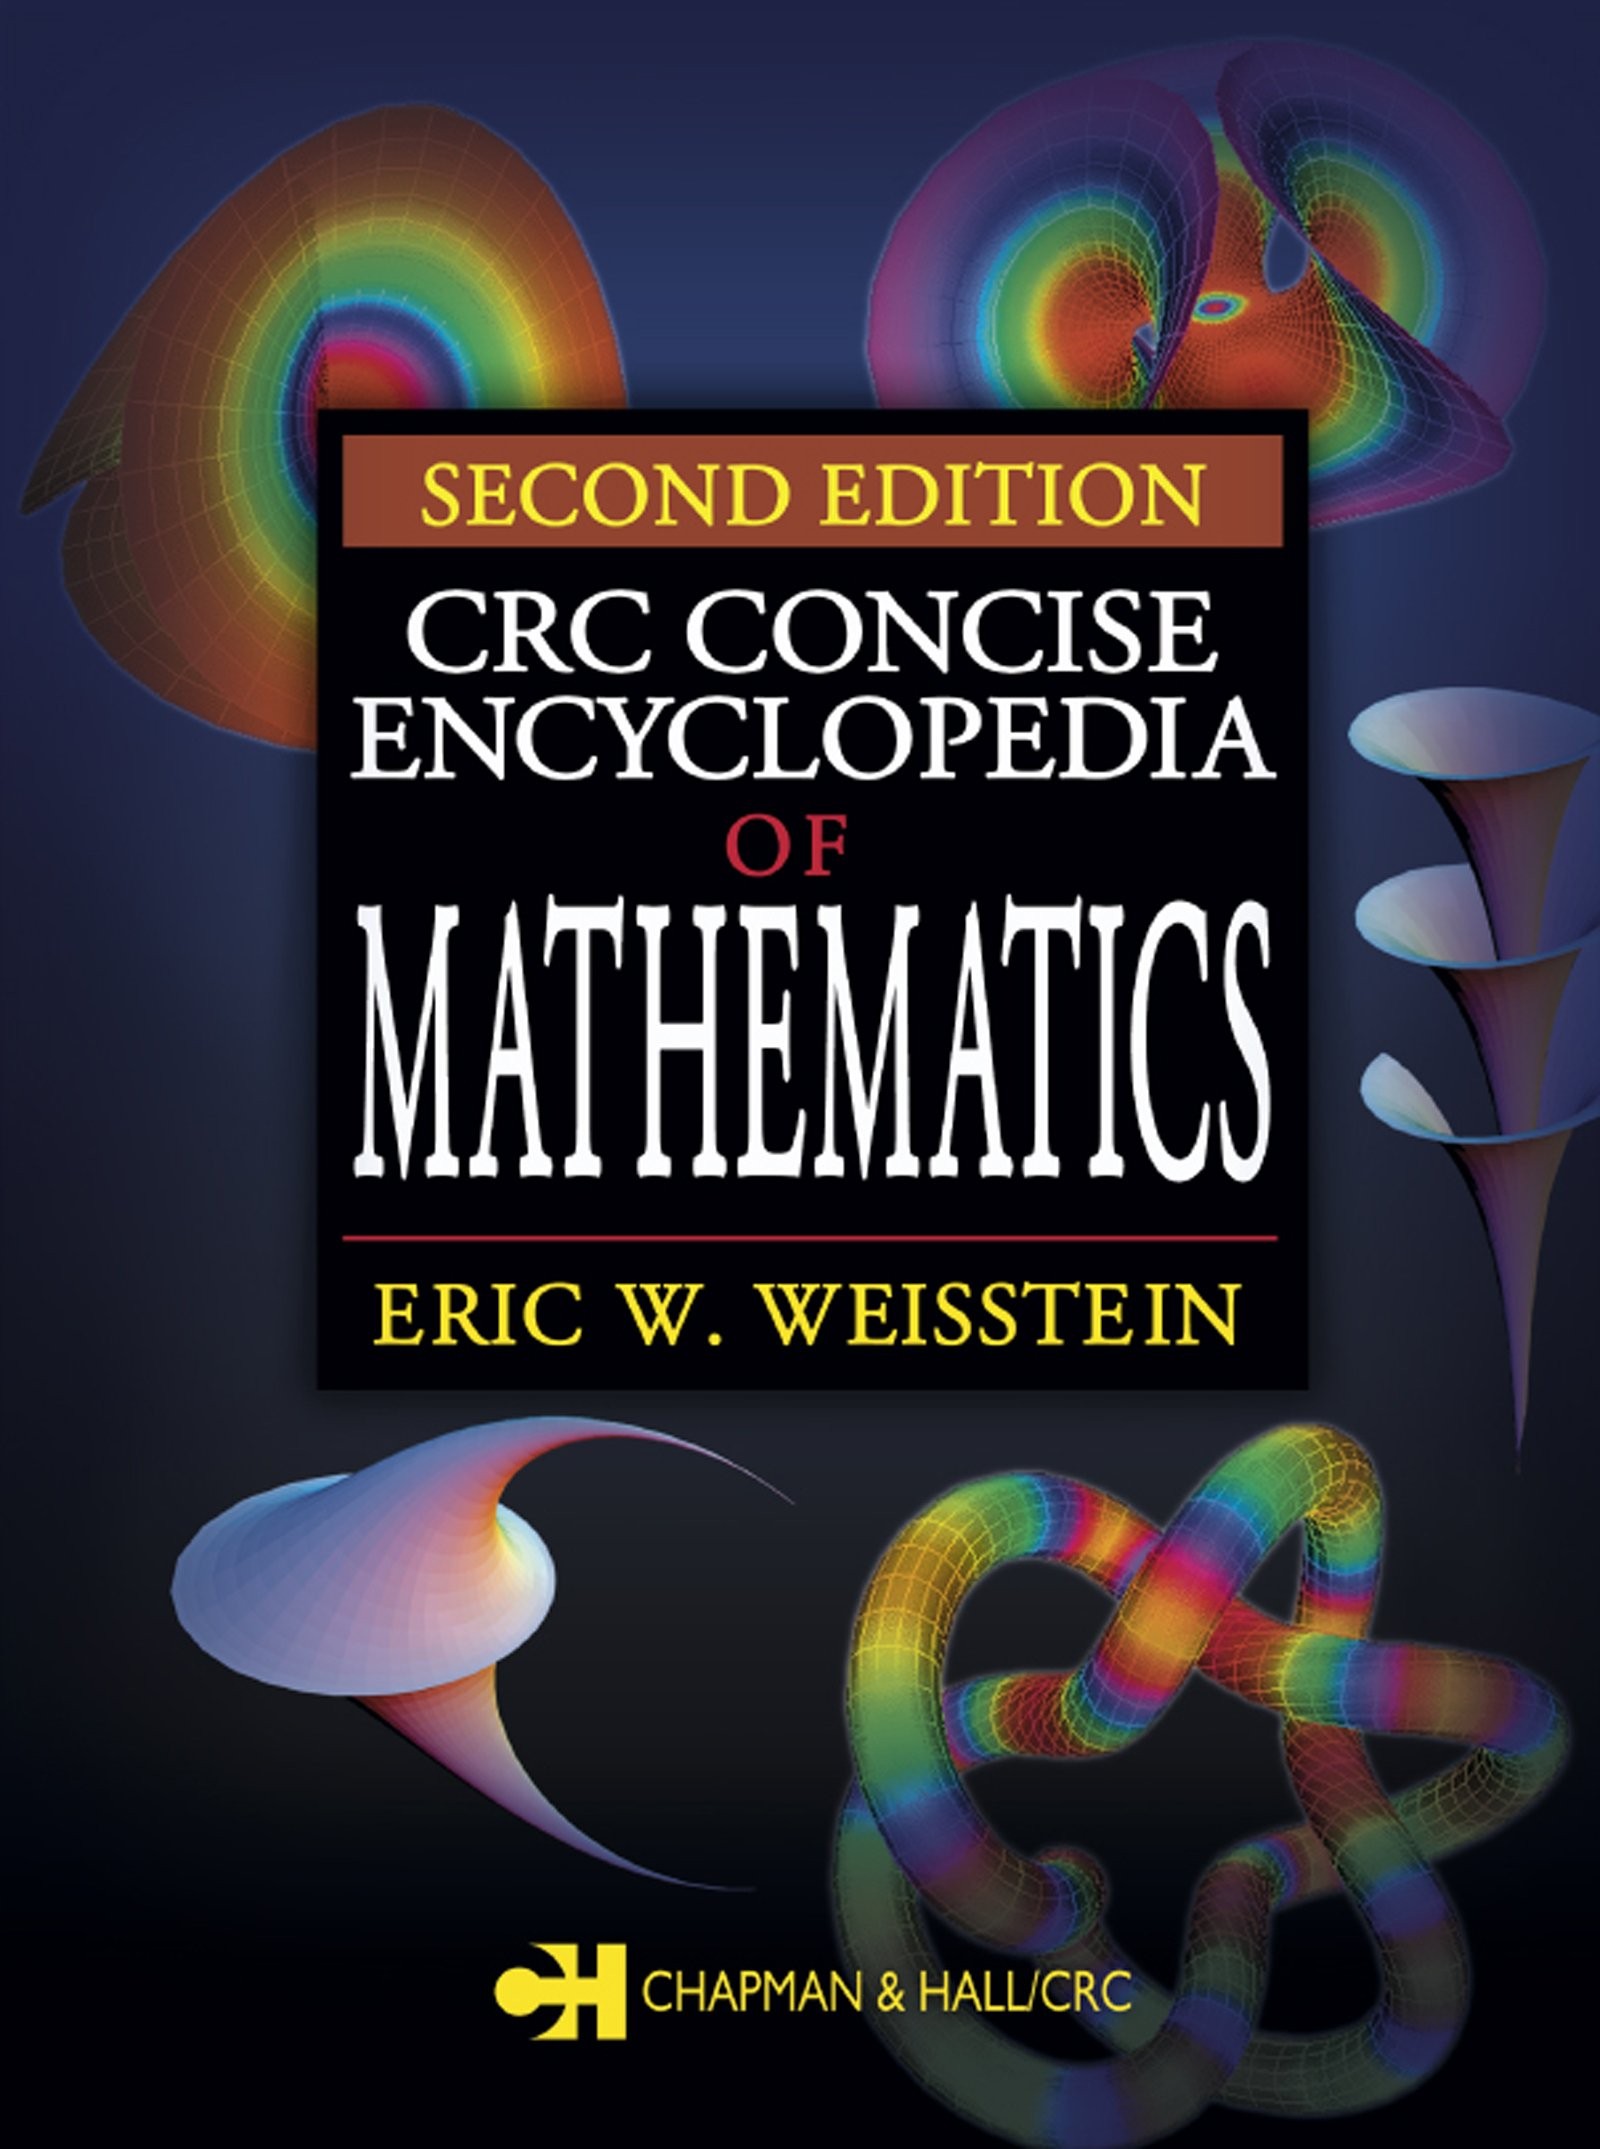 CRC Concise Encyclopedia of Mathematics, Second Edition